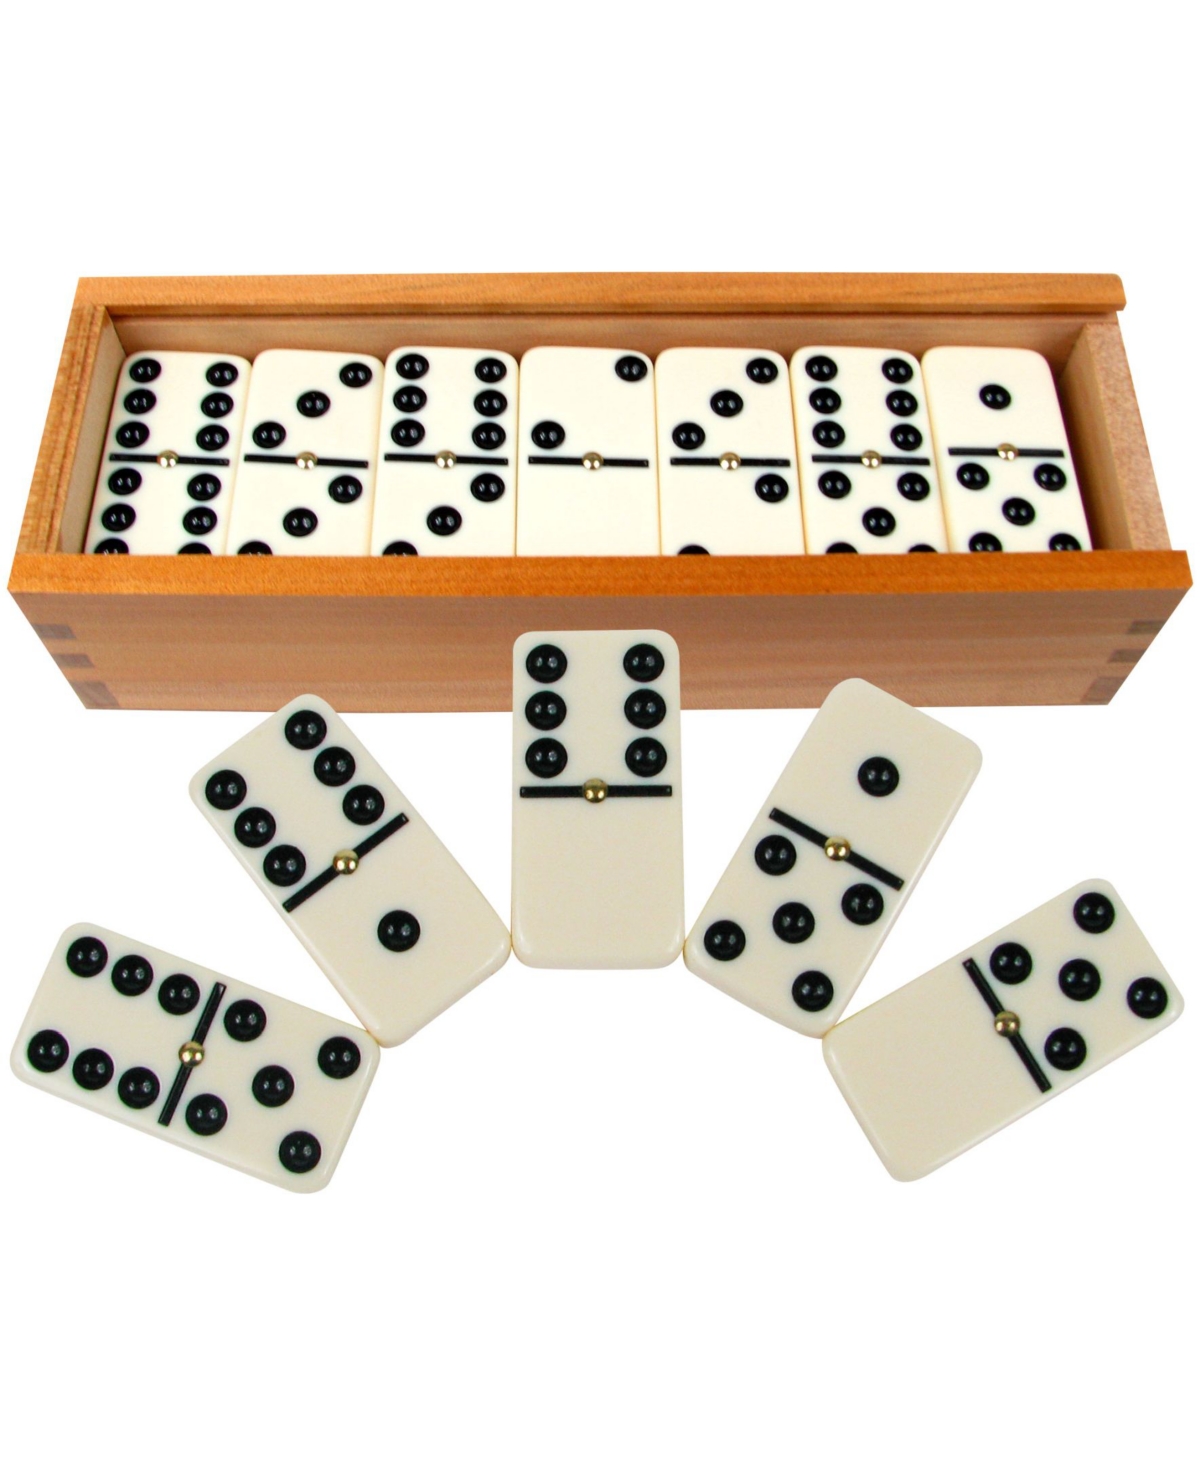 Trademark Global Hey Play Premium Set Of 28 Double Six Dominoes Wood Case In White